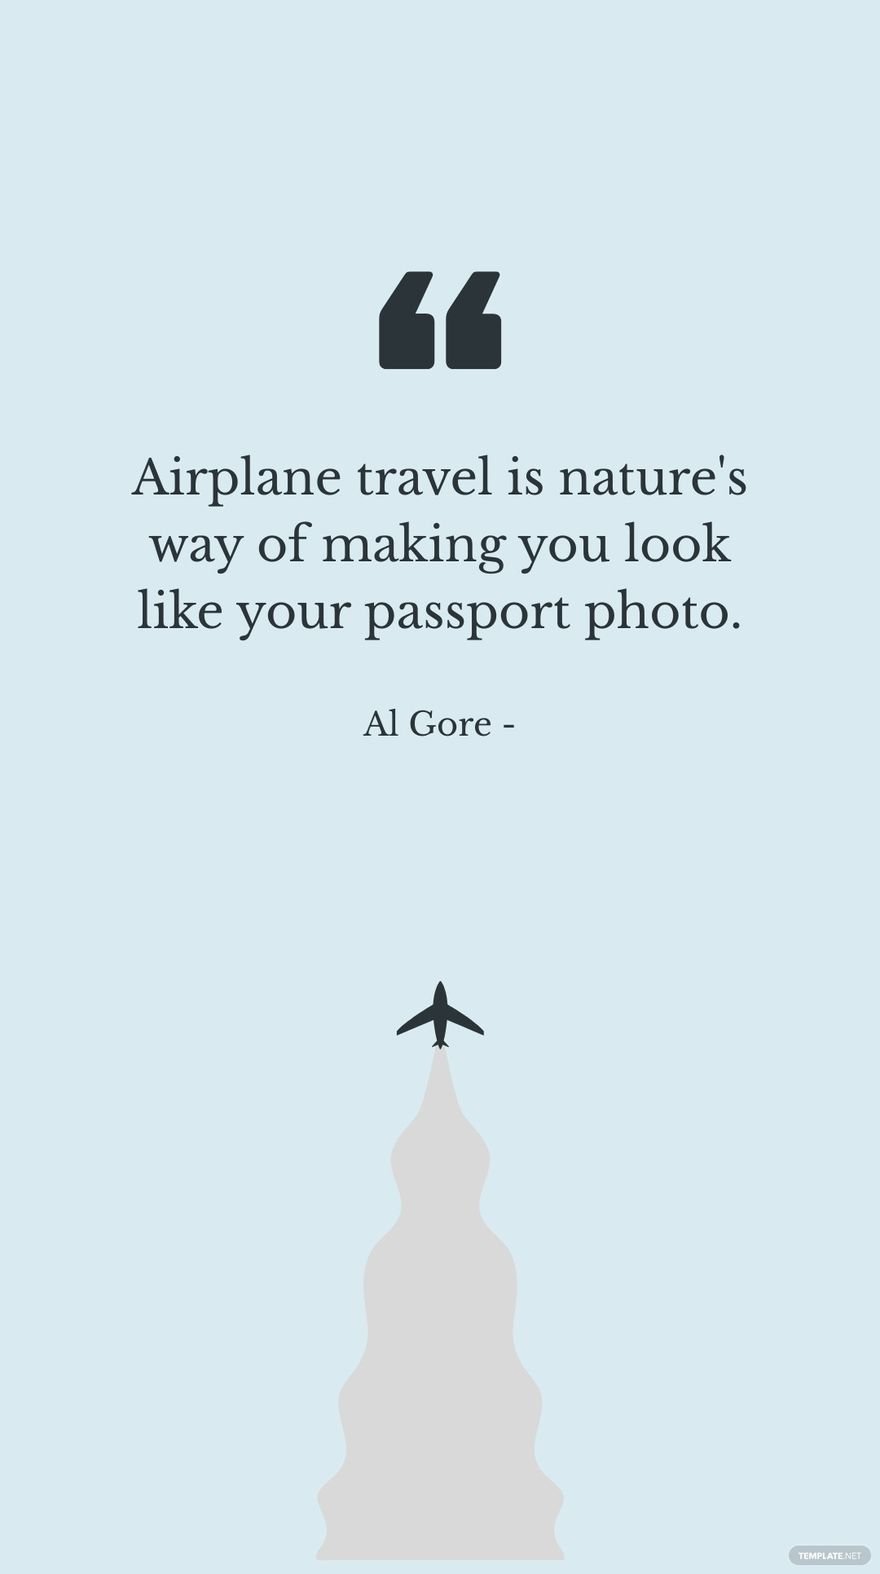 Free Al Gore - Airplane travel is nature's way of making you look like your passport photo. in JPG